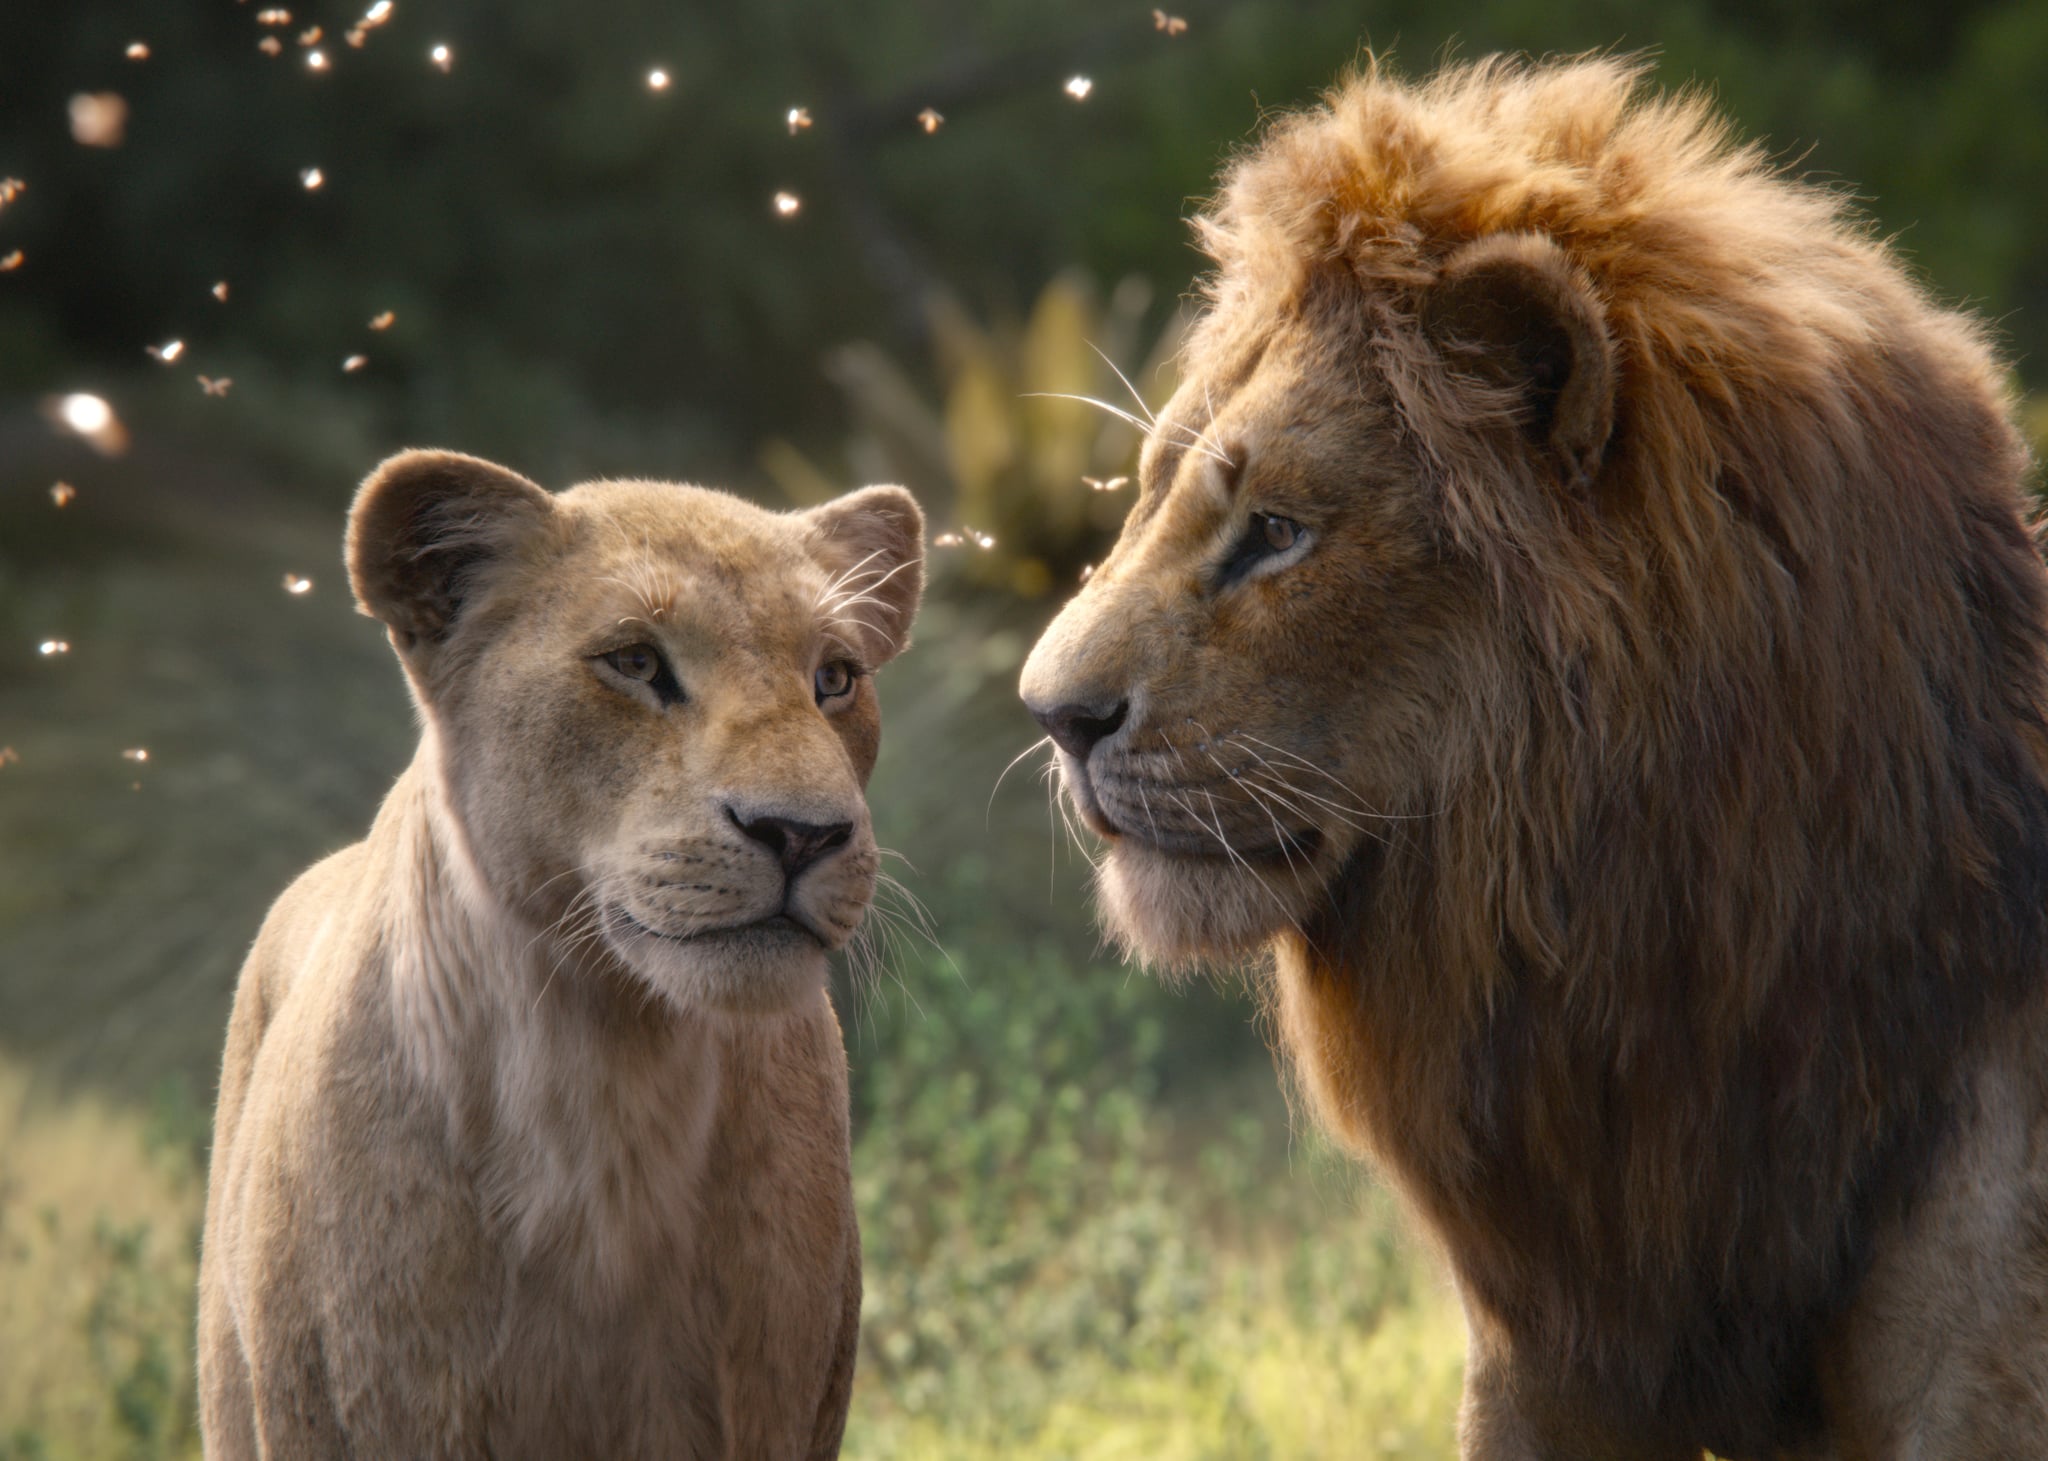 THE LION KING, from left: Nala (voice: Beyonce Knowles-Carter), Mufasa (voice: James Earl Jones), 2019.  Walt Disney Studios Motion Pictures / courtesy Everett Collection